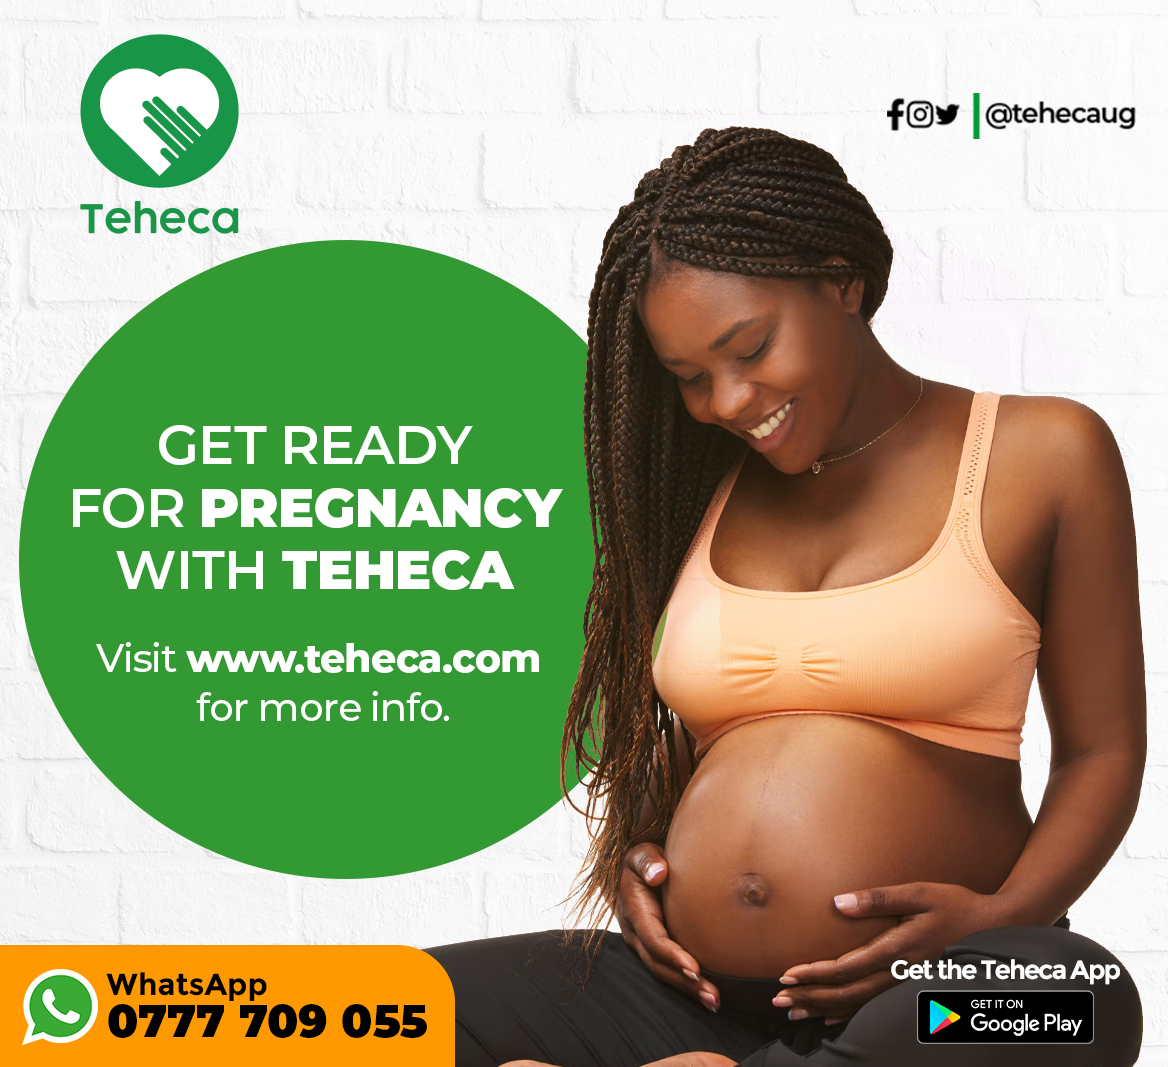 From antenatal health tips to baby shopping. Maternal and baby products as well as postnatal care. Teheca helps you venture through this unique journey to parenthood.
Visit bit.ly/m/tehecaug 
#baby #mother #pregnancyjourney #postnatalcare